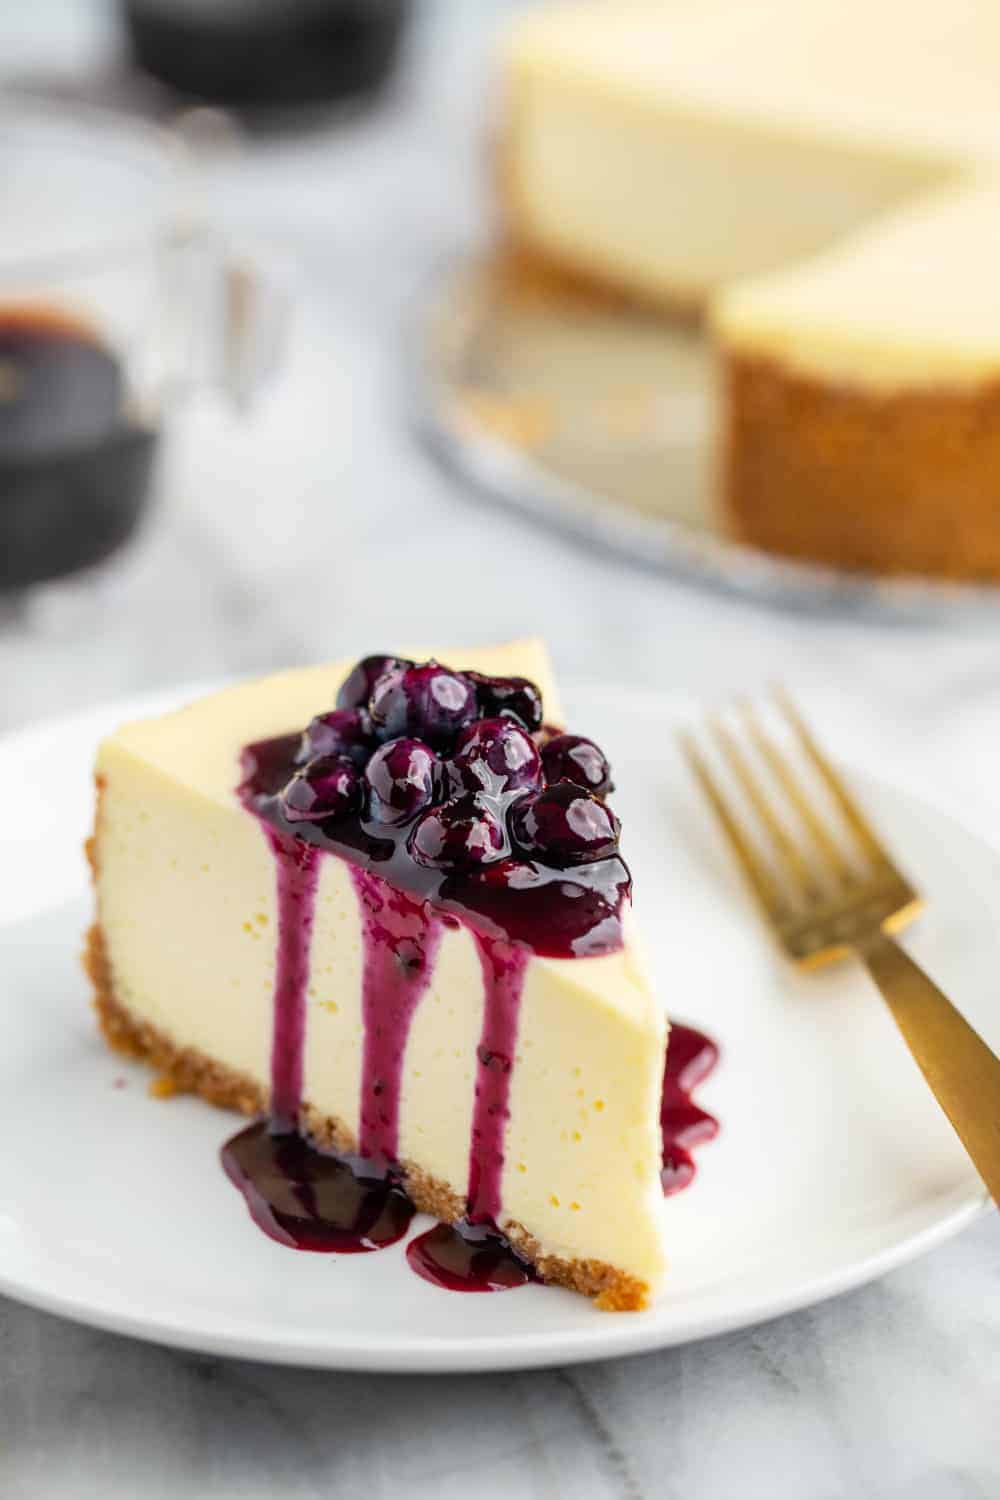 Slice of vanilla cheesecake topped with blueberry sauce, with the rest of the cheesecake in the background